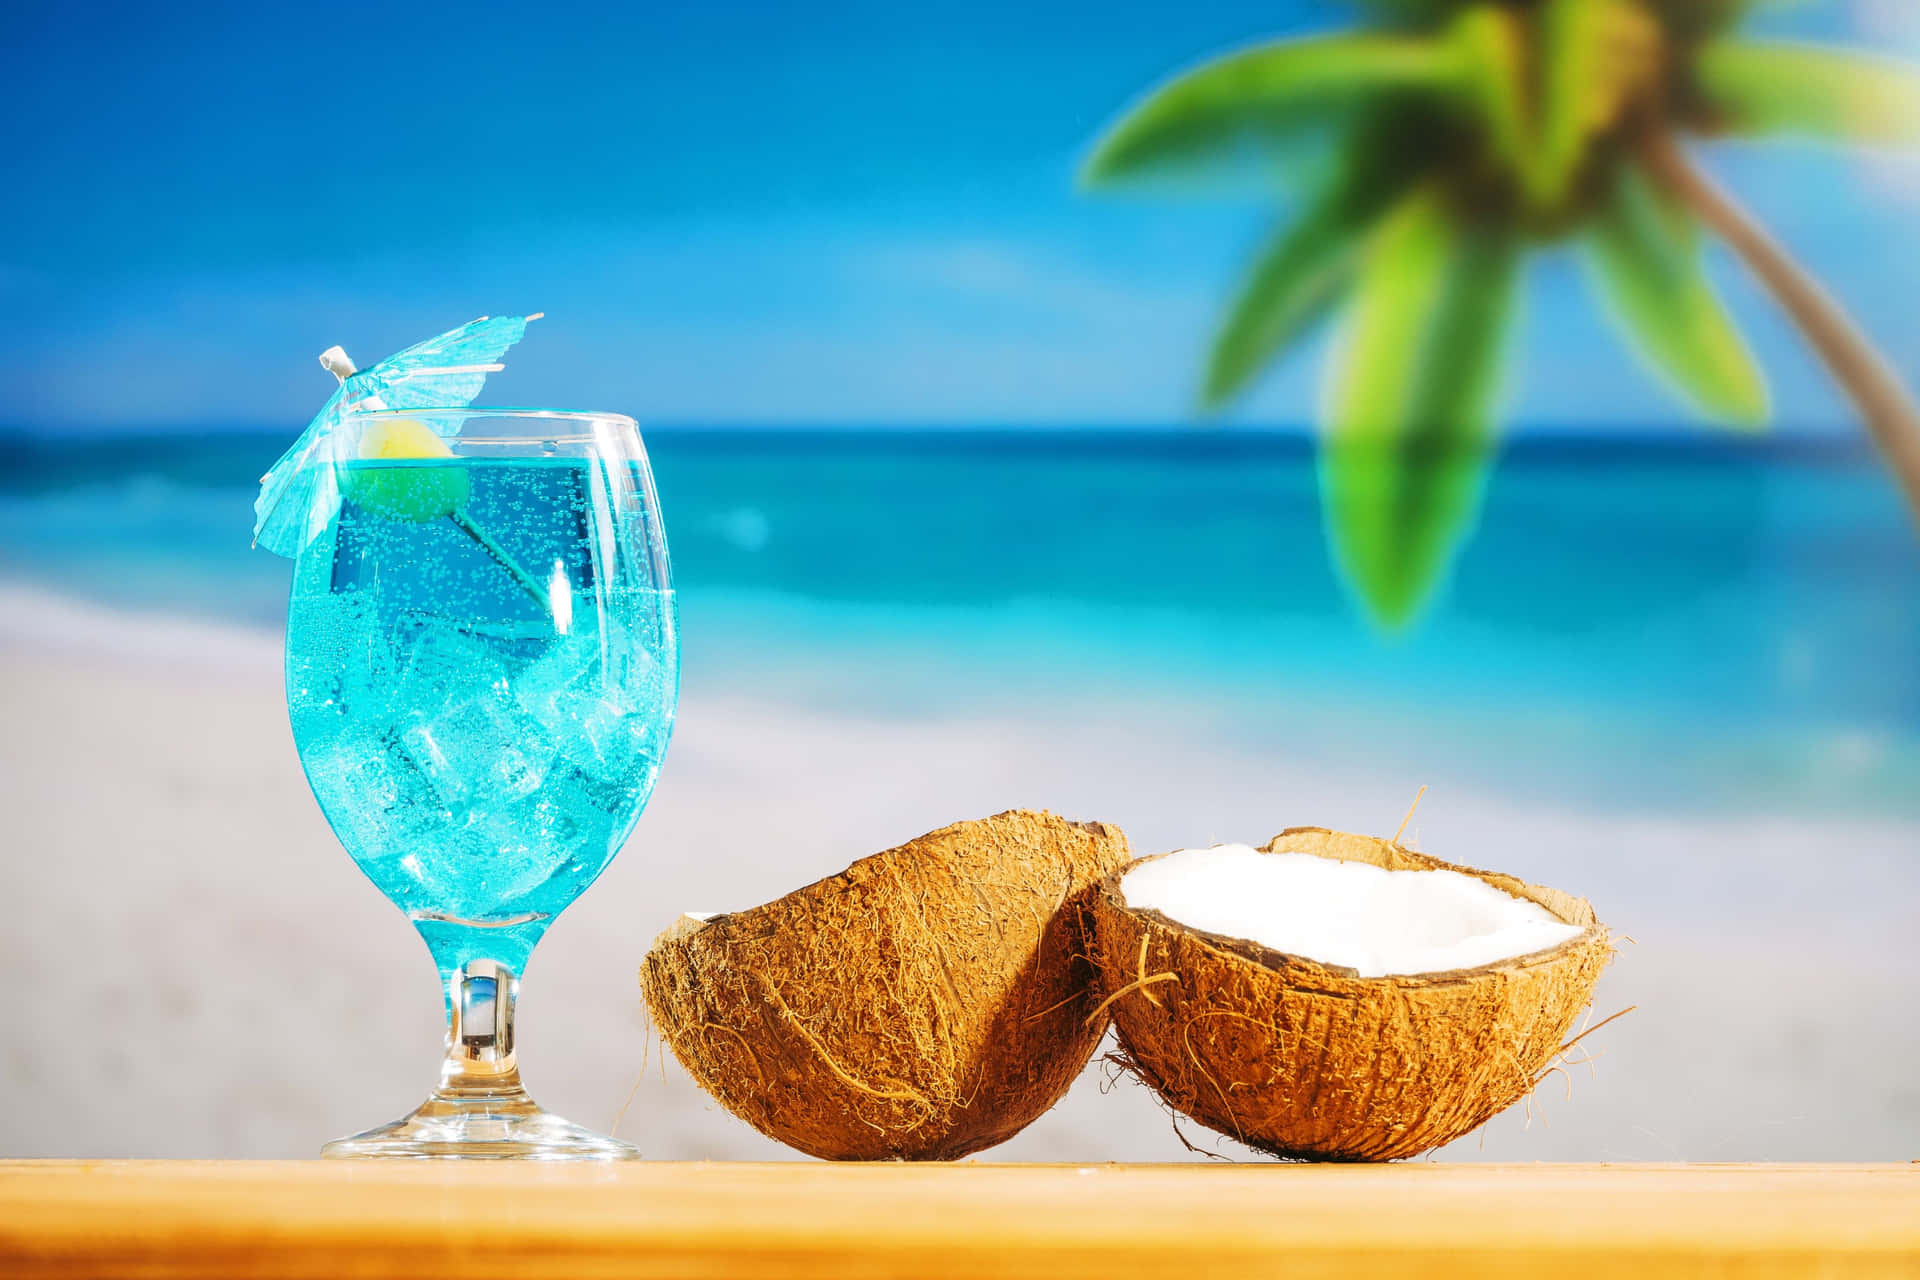 Tropical Coconut with Beach Setting